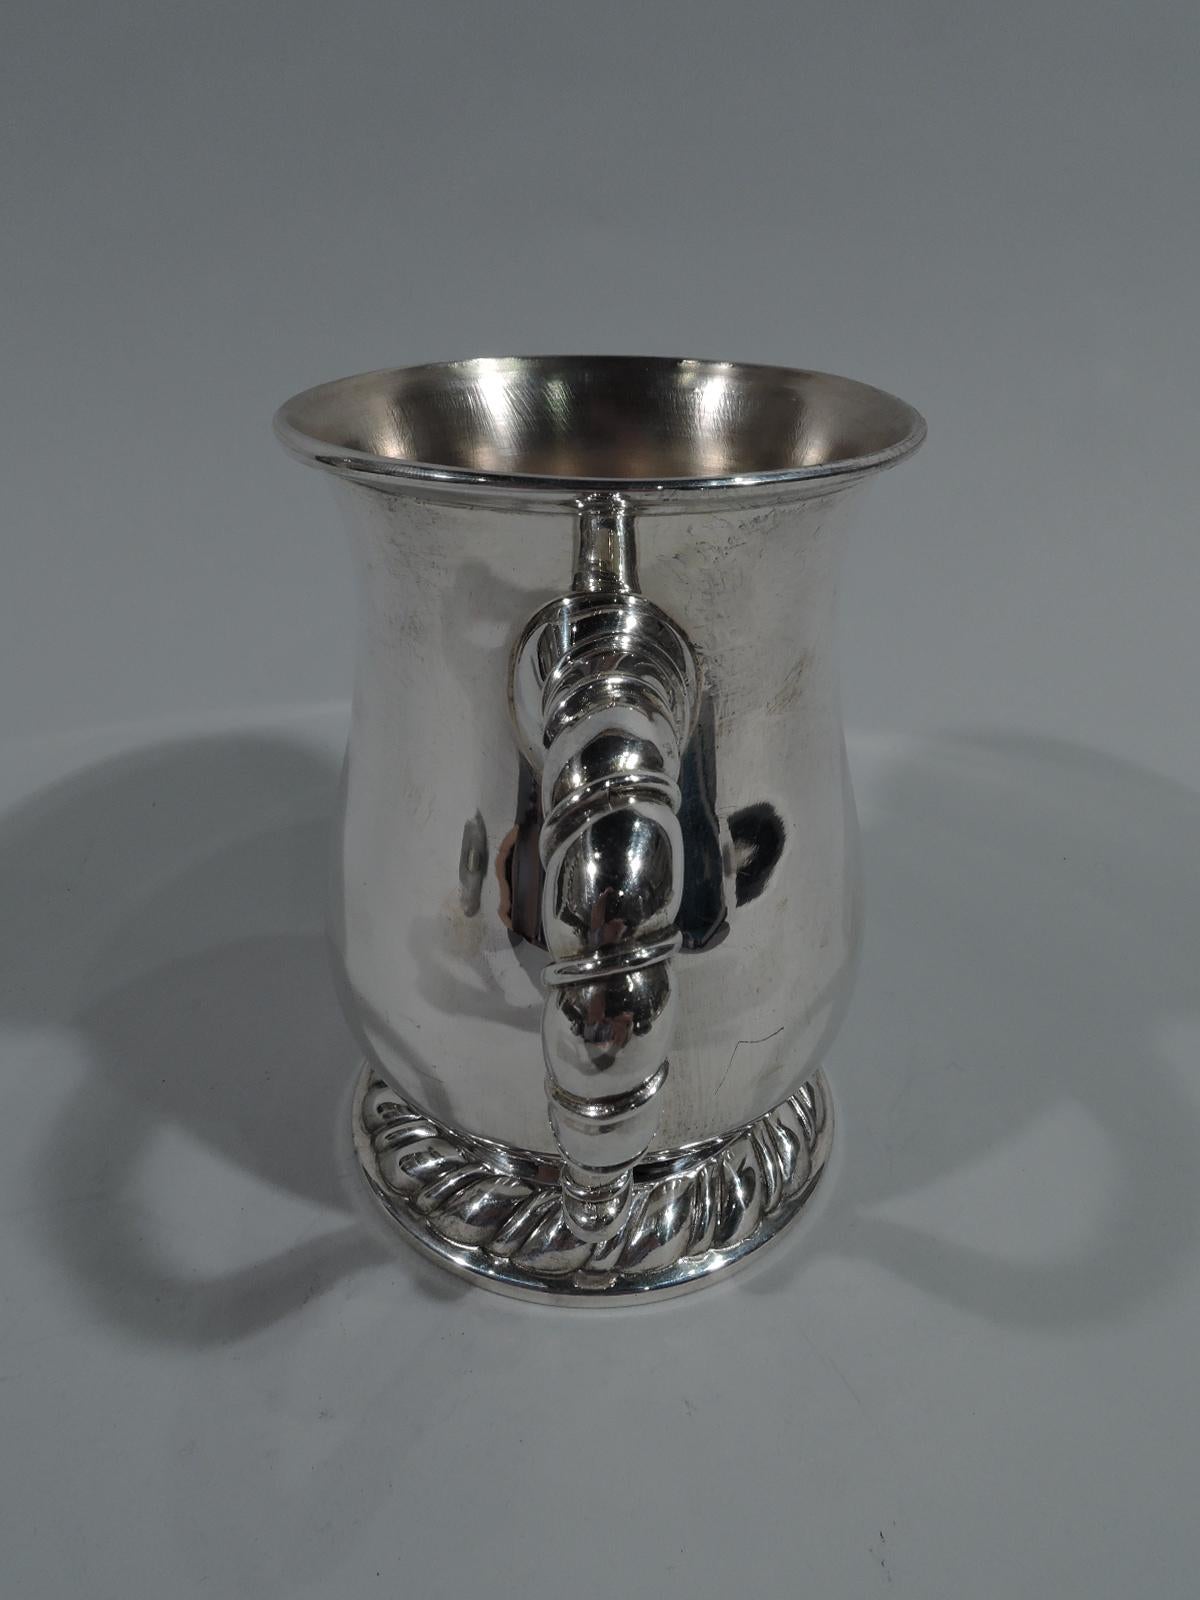 Large and heavy Modern Classical sterling silver christening mug in Torchon pattern. Made by Buccellati in Italy. Baluster on raised and spread foot with embossed gadrooning and scrolled rope handle. Substantial with lots of room for engraving.